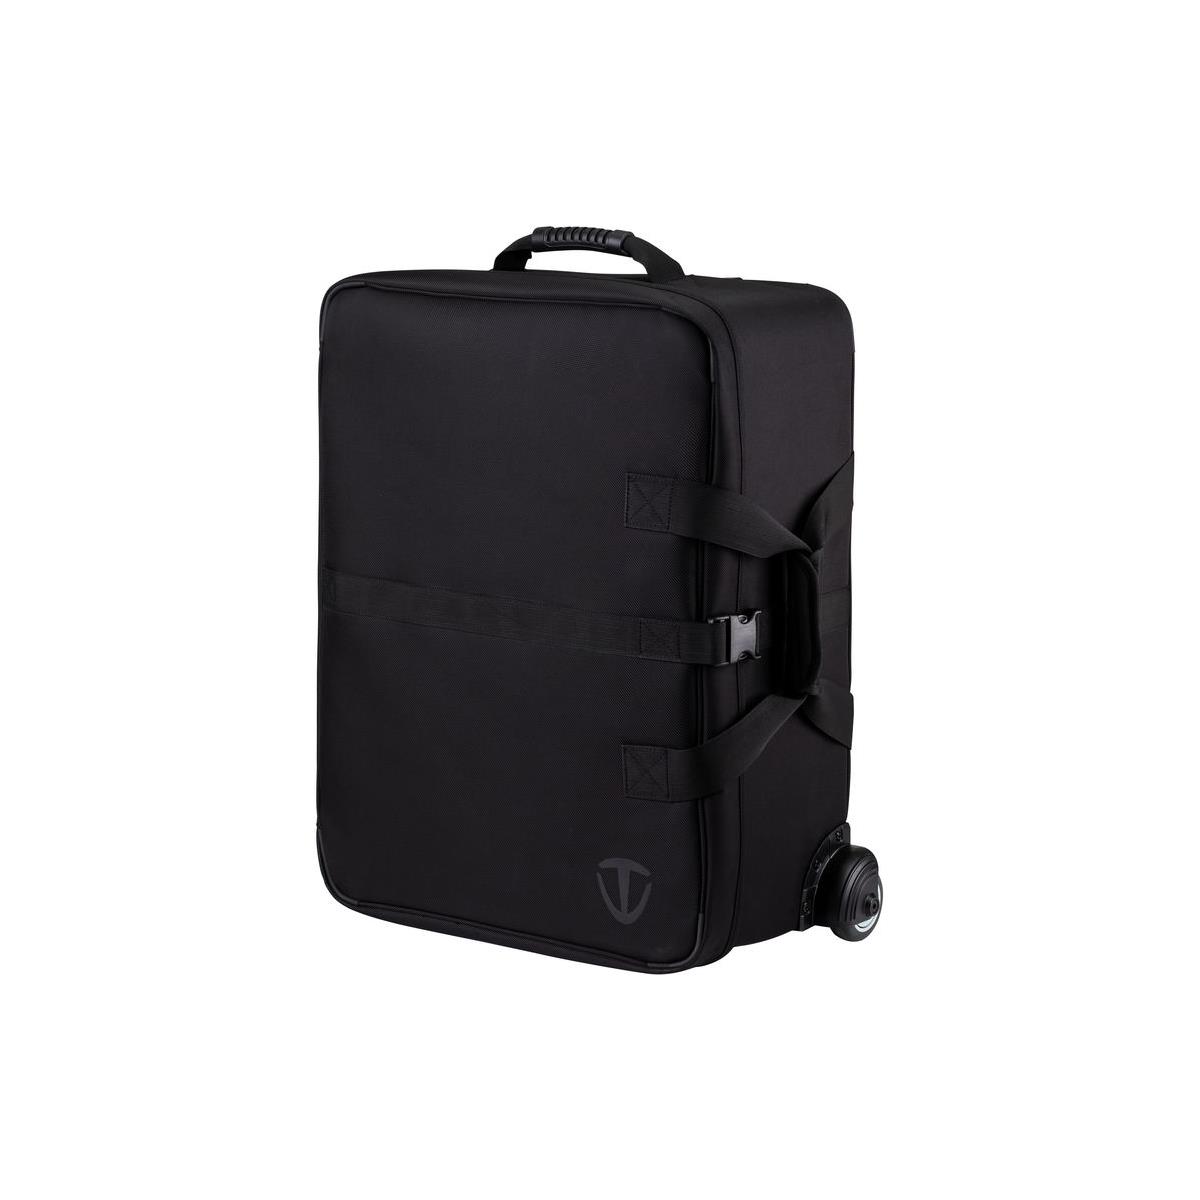 Image of Tenba Attache 2520W Transport Air Wheeled Case for 2 Camera &amp; 7 Lenses